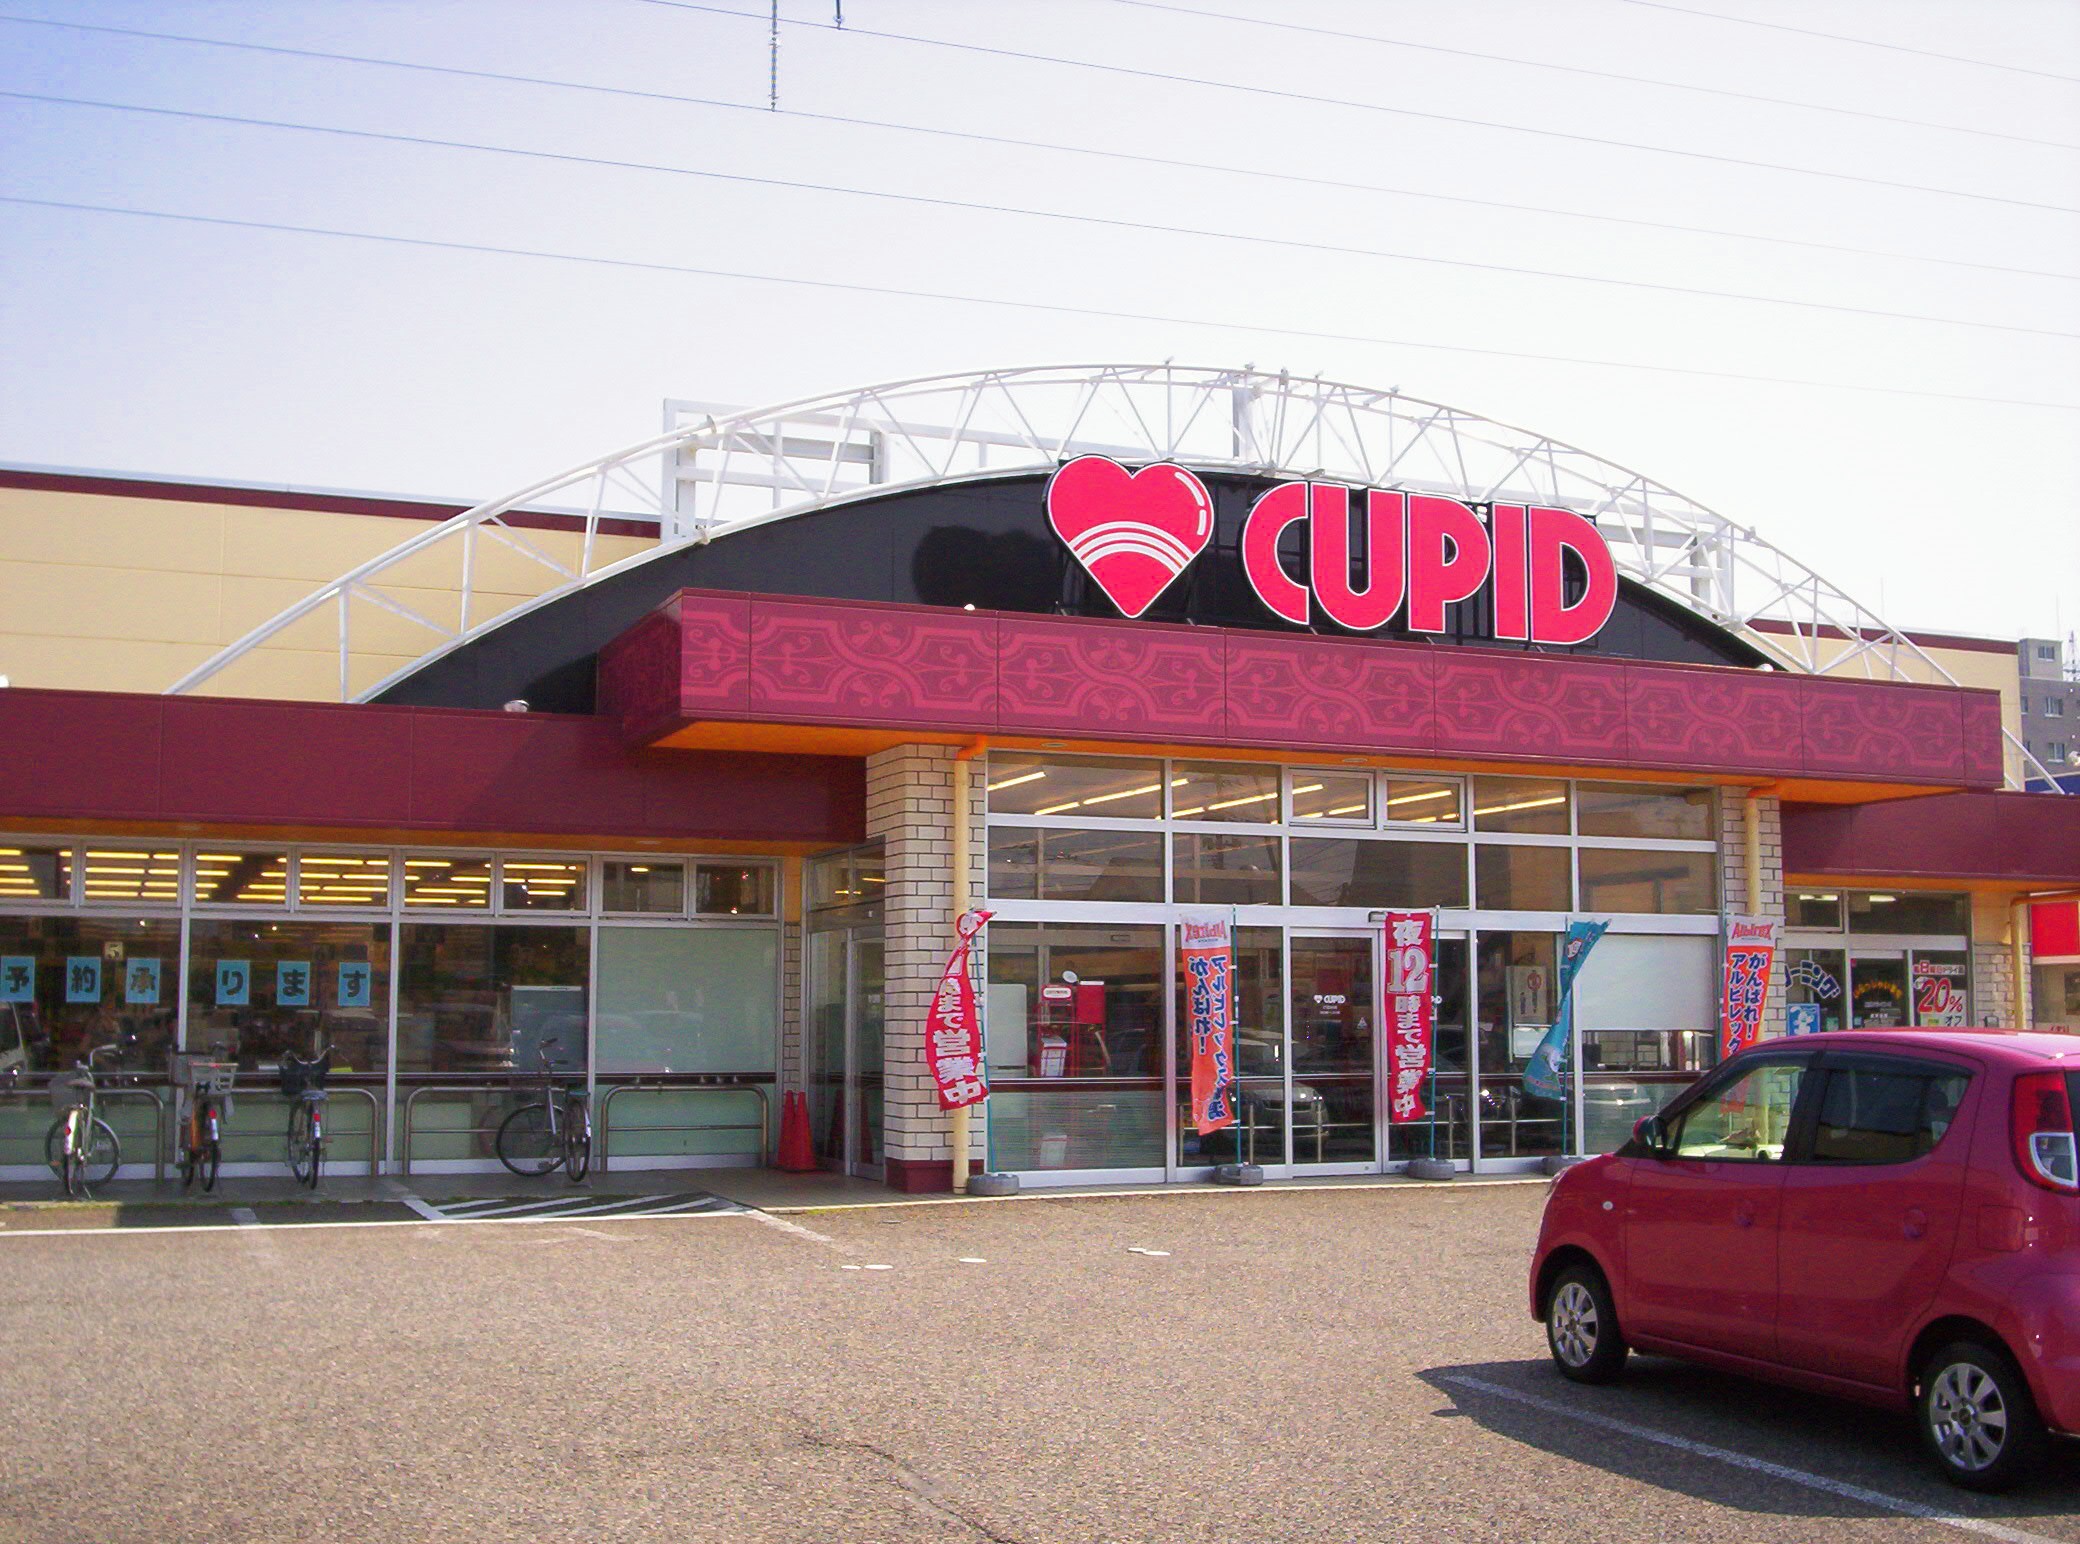 Cupid, the supermarket where I buy most of my groceries. As my other favorite college prof made us say at the beginning of every class: "Mythology is alive; mythology is ubiquitous."